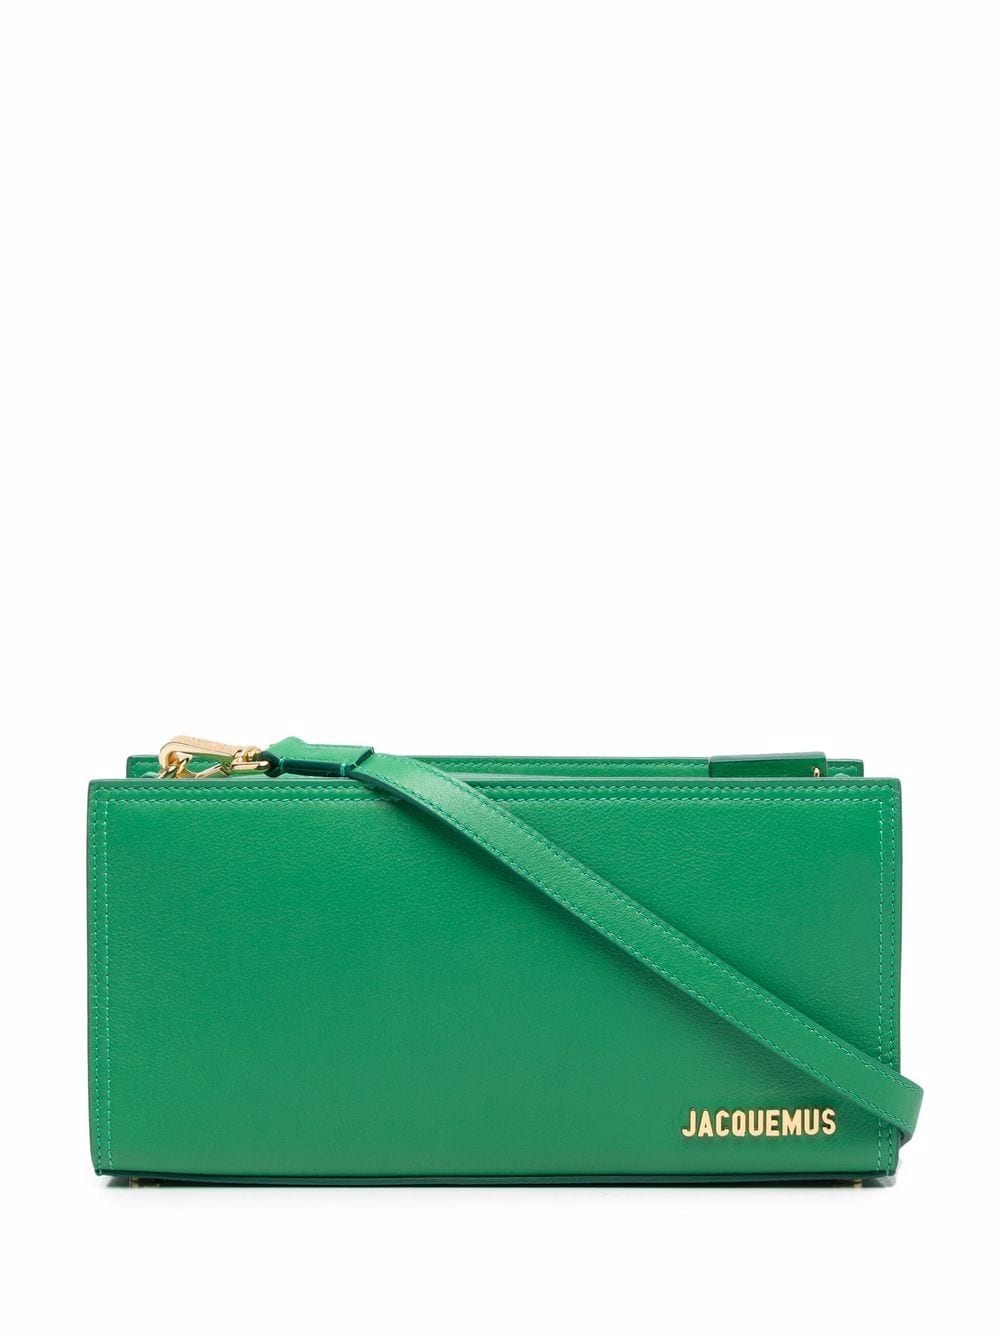 Jacquemus logo-lettering Leather Tote - Farfetch